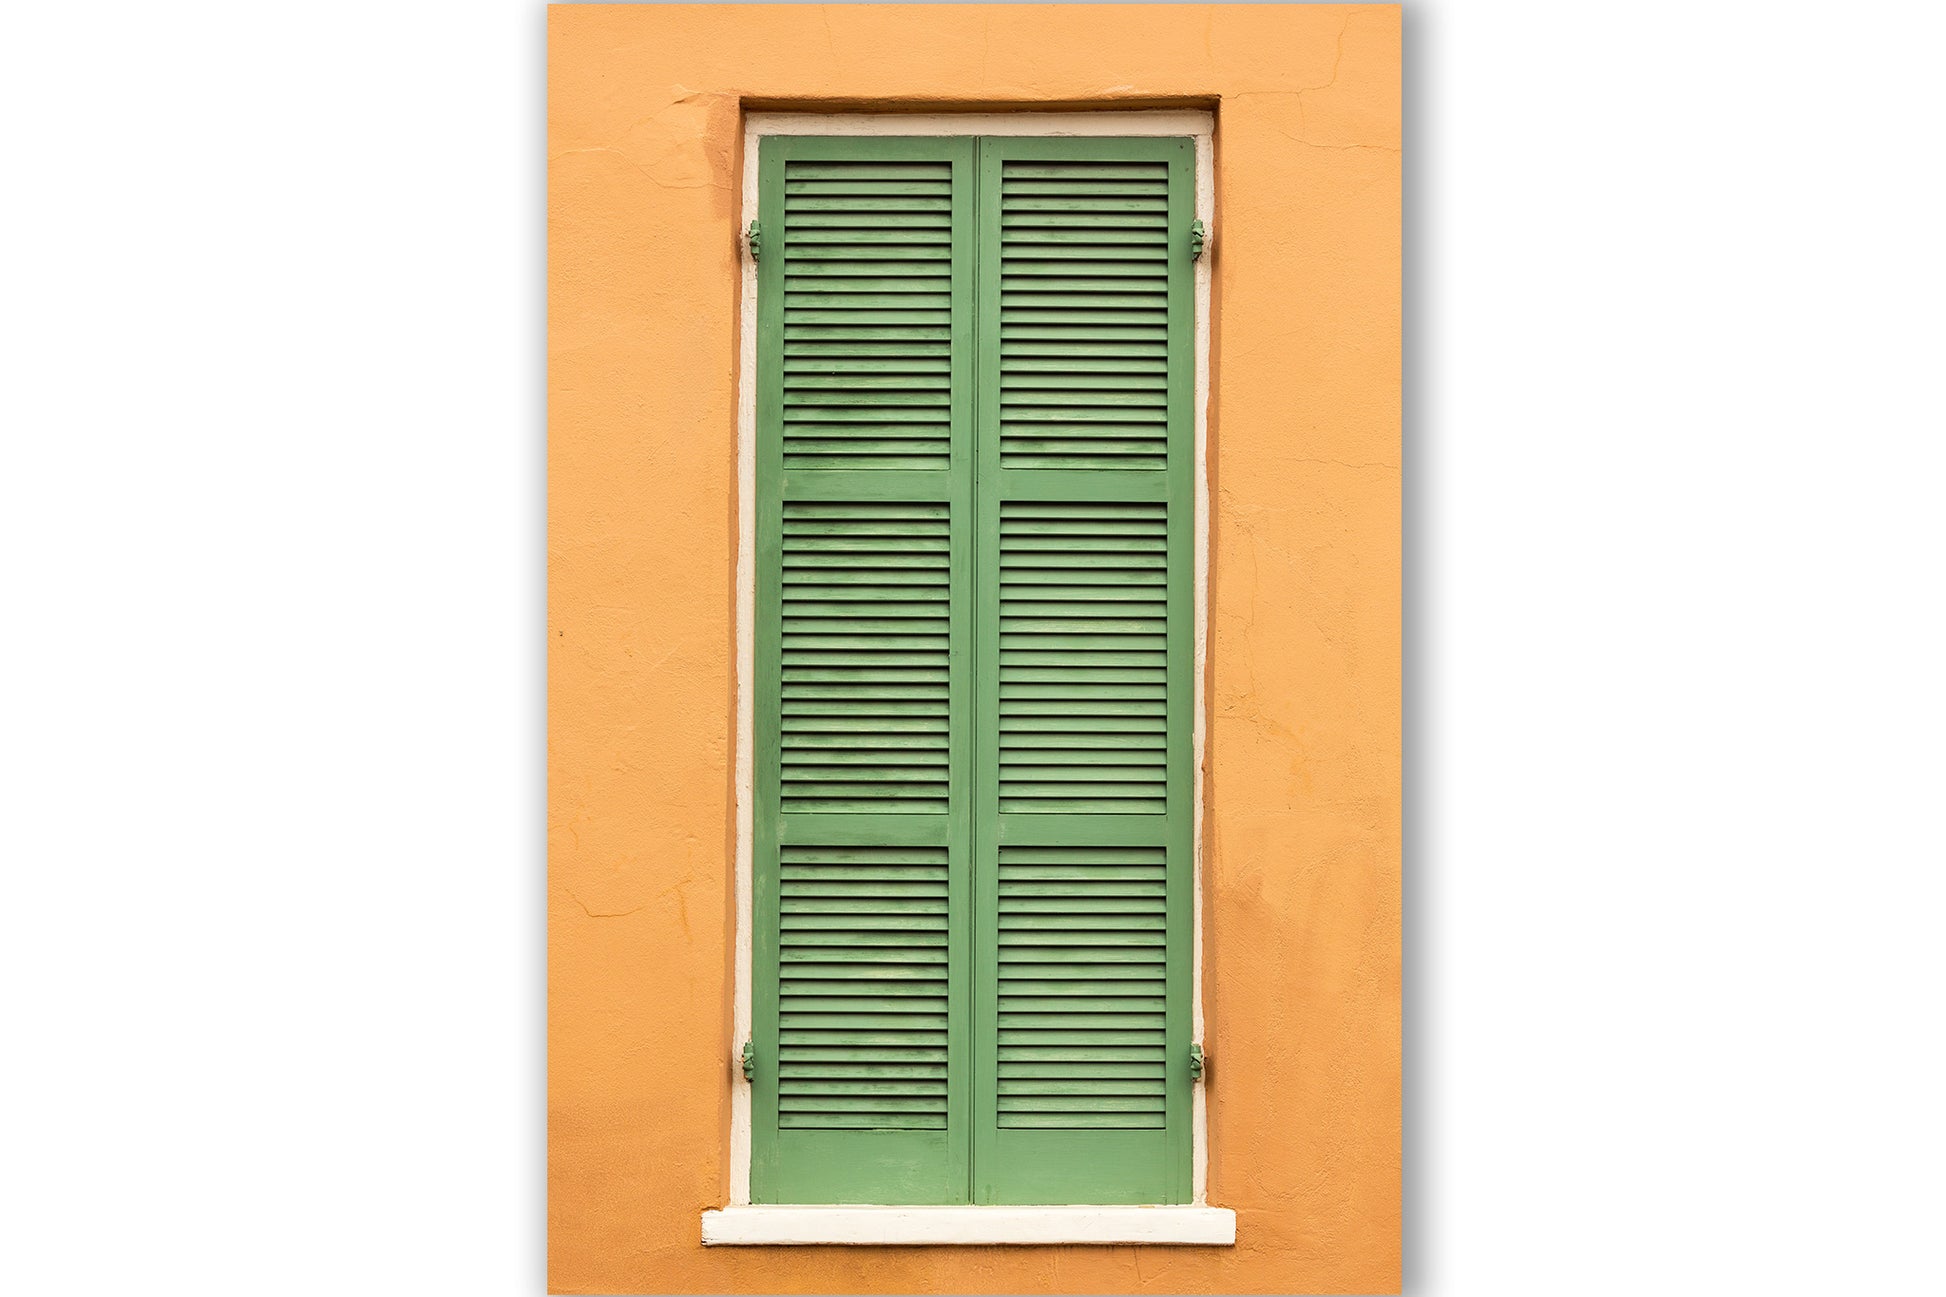 Vertical NOLA photography print of green shutters against an orange wall in the French Quarter of New Orleans, Louisiana by Sean Ramsey of Southern Plains Photography.